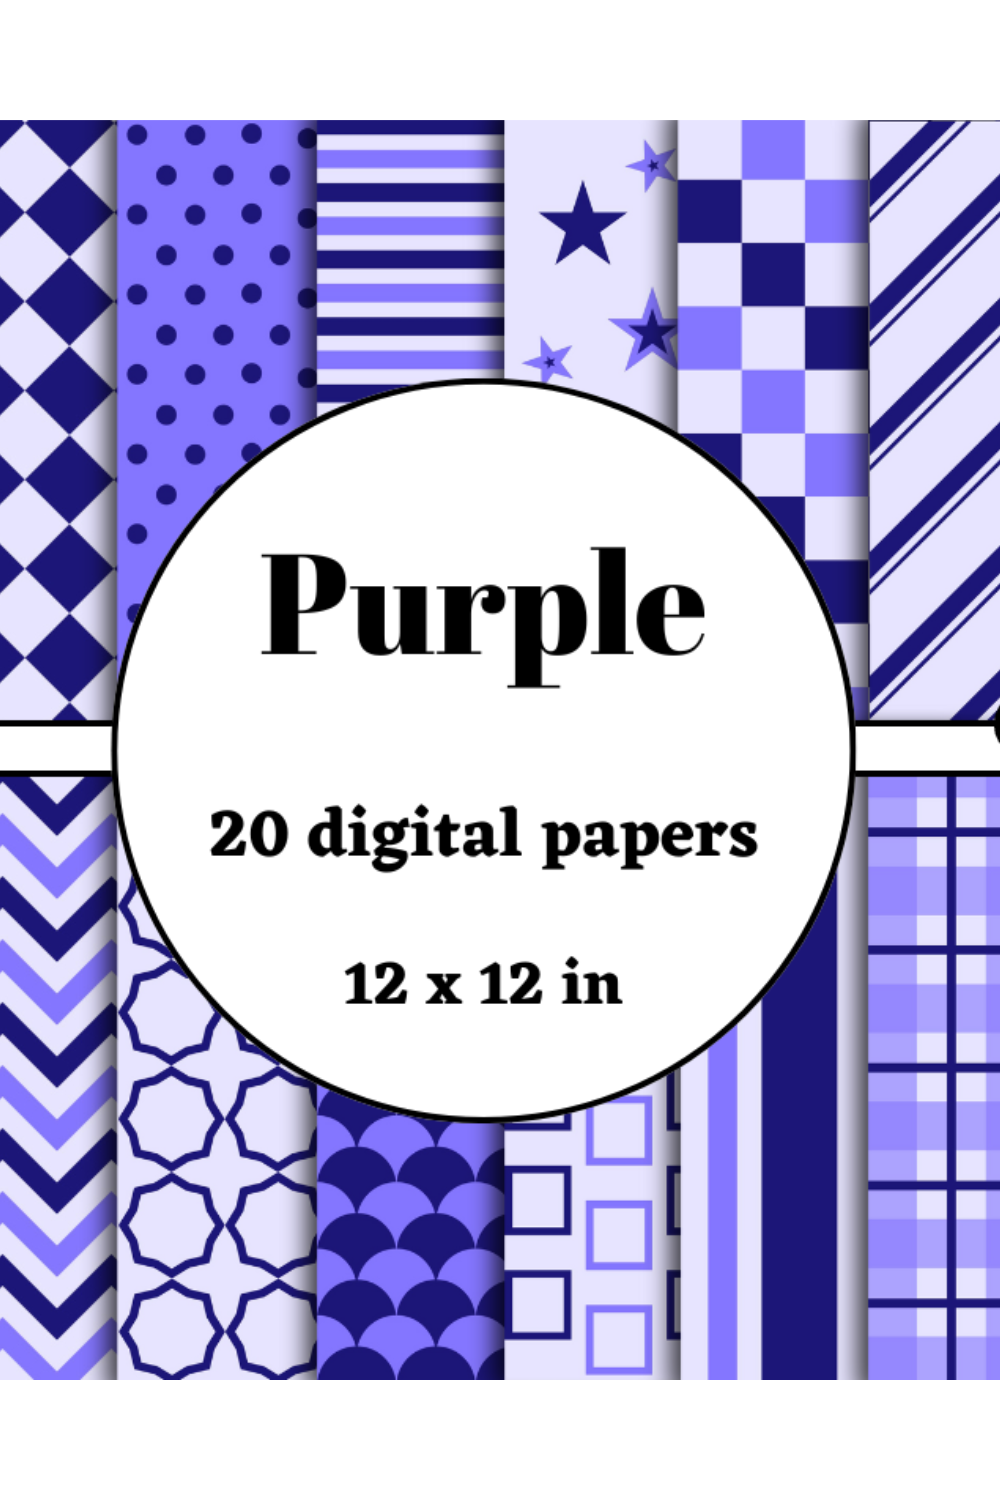 purple digital papers pinterest preview image.